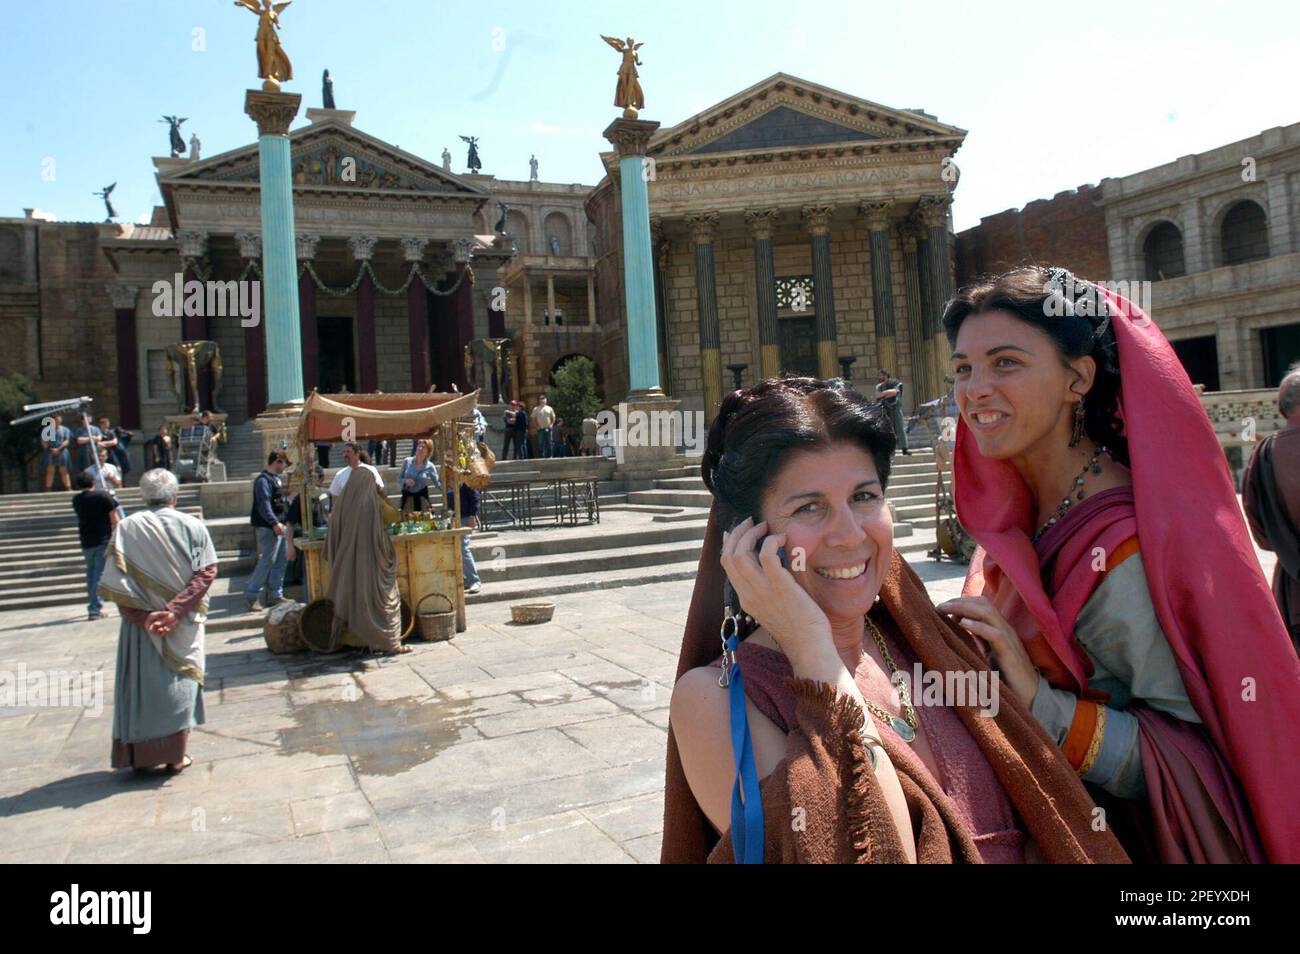 Savina Rotundo, left, and Maria Pia Morano, extras acting the role of noble  women, have a break during the filming of a new drama series "Rome", set in  51 BC, in Rome's